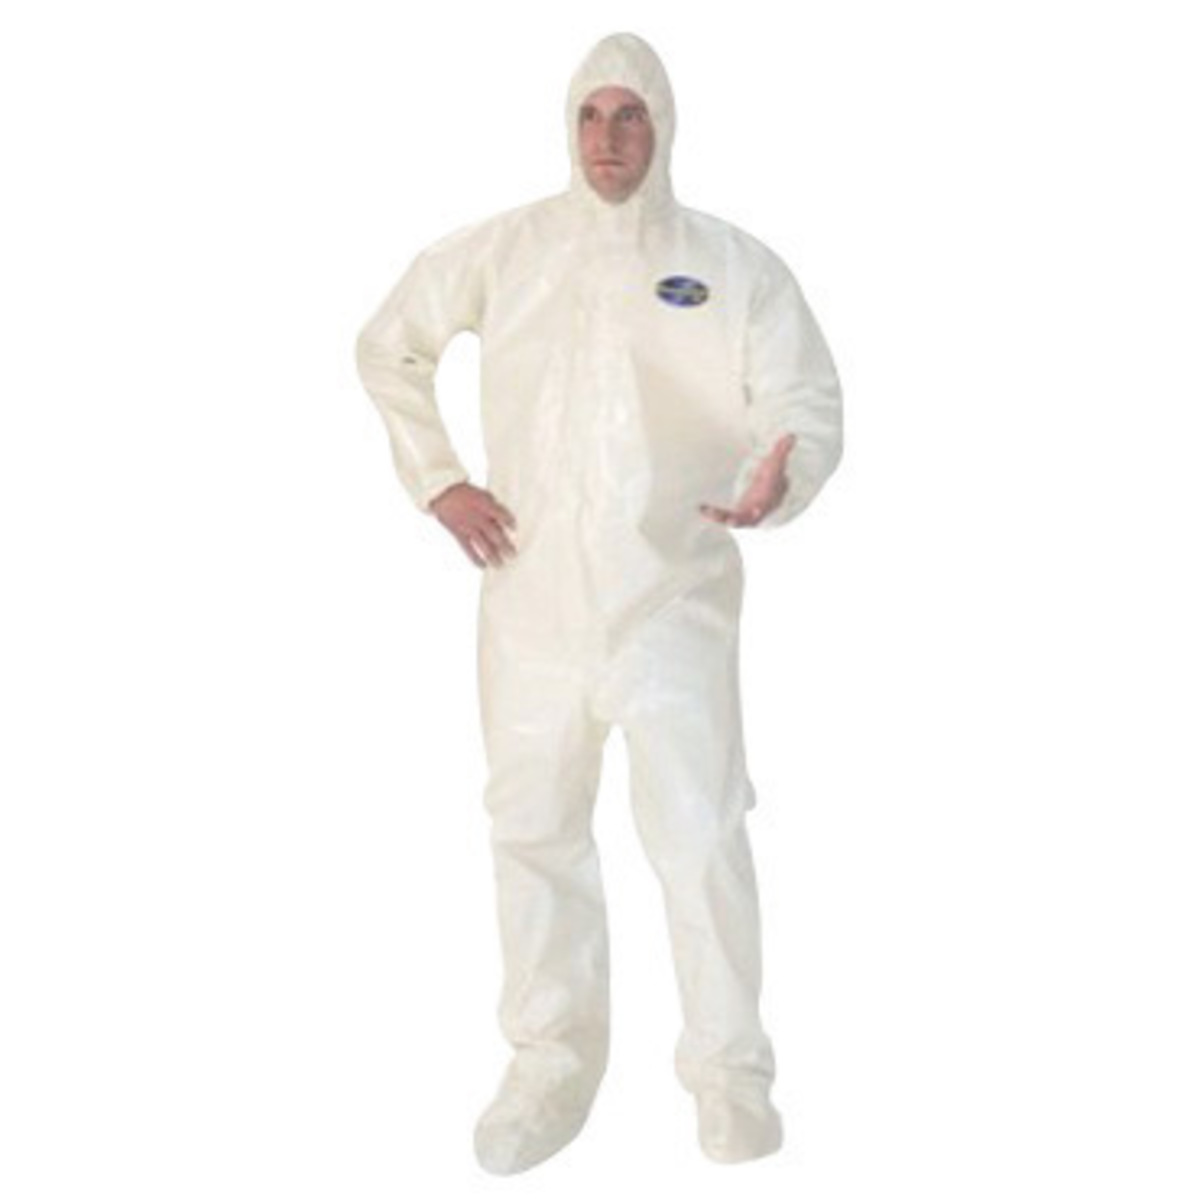 Kimberly-Clark Professional* Size 4X White KleenGuard* A80 Saranex® 23-P Film Laminate Coveralls With Storm Flap Over Front Zipp